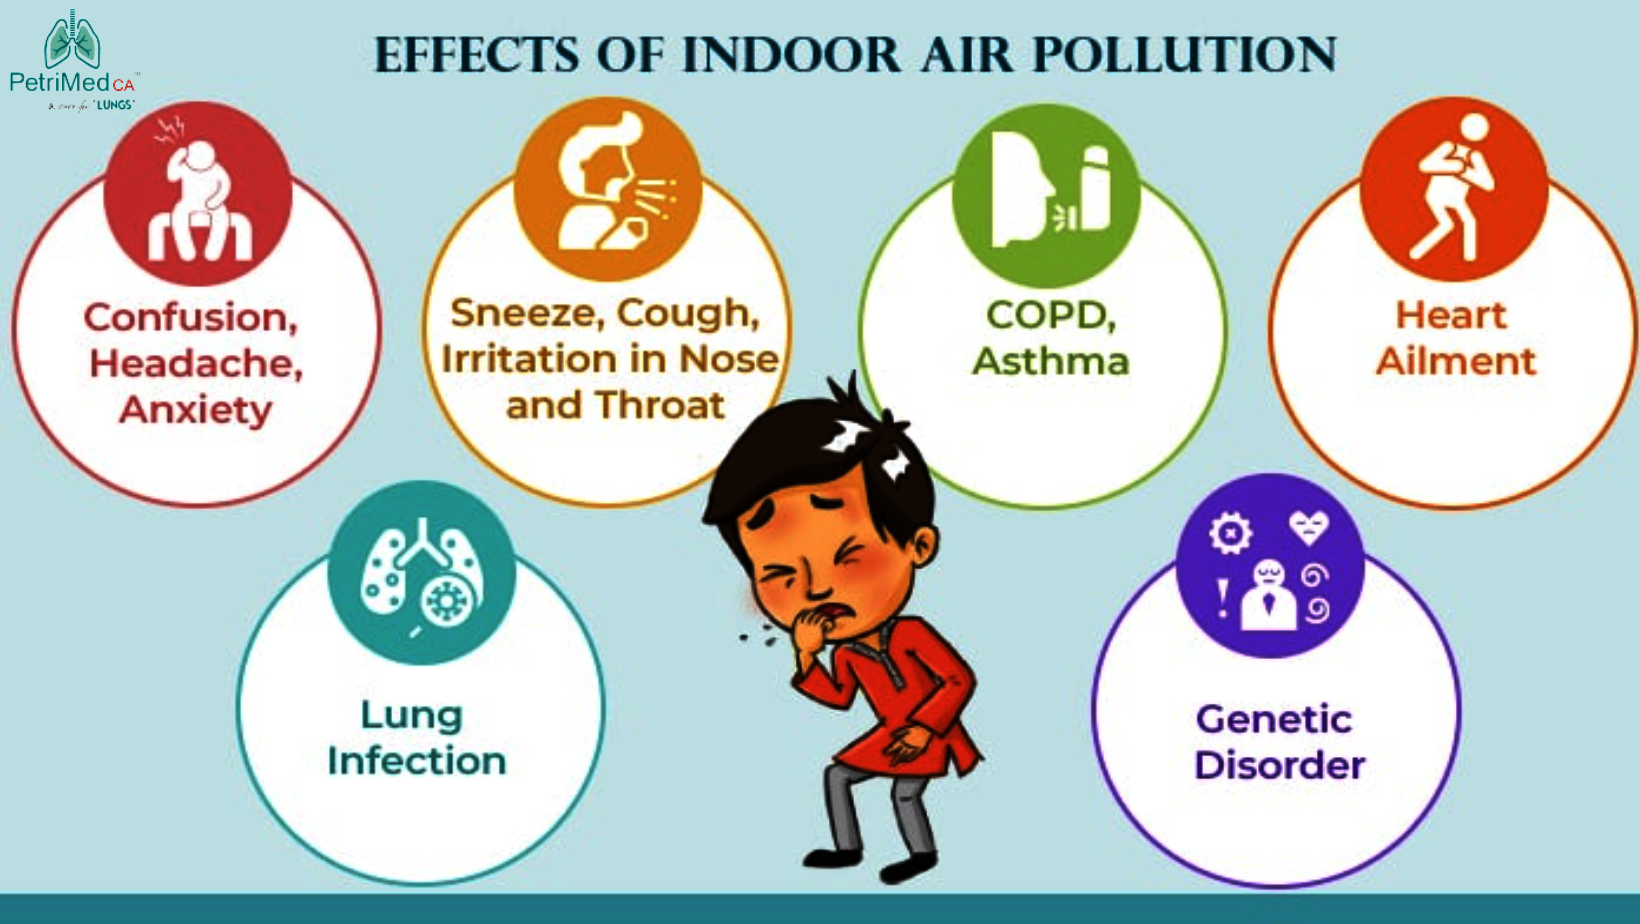 Children are Vulnerable to Acute Lungs Infections Due to Poor Air Quality